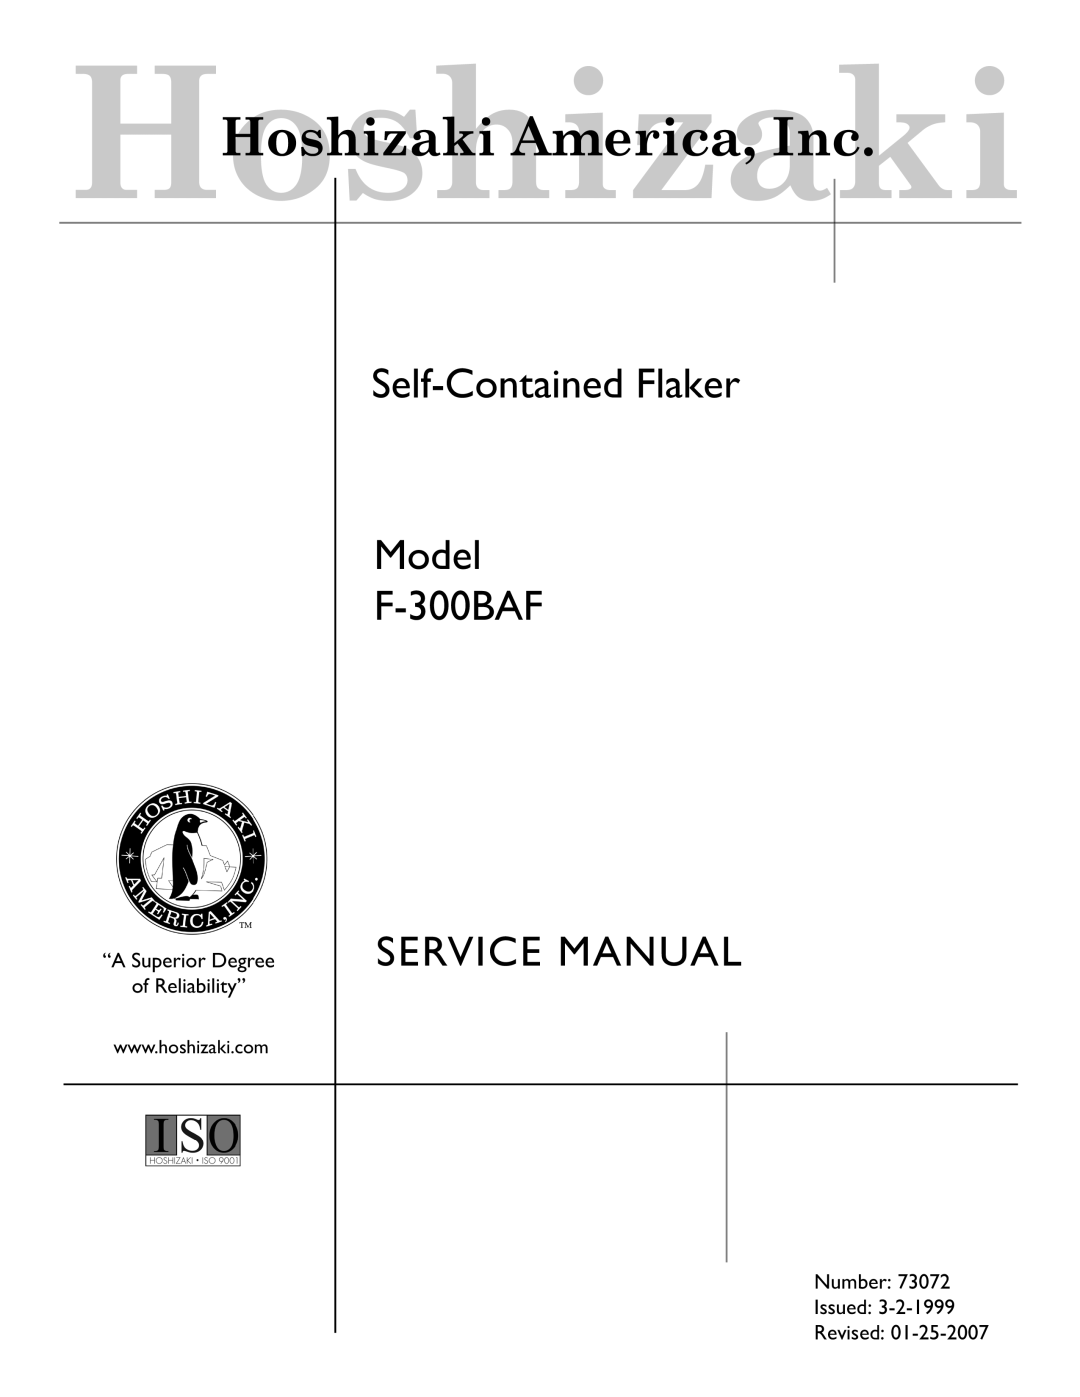 Hoshizaki F-300BAF service manual “A Superior Degree of Reliability”, Number Issued Revised 